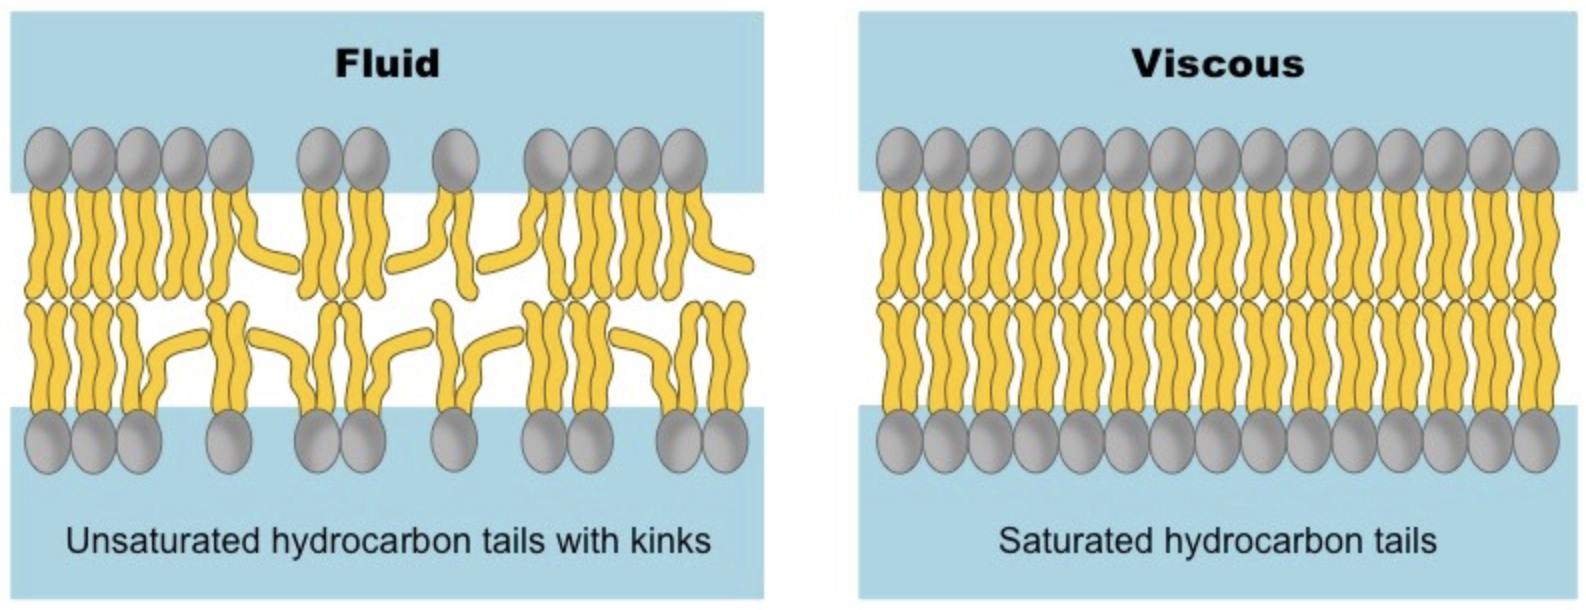 <p>Cell membranes are fluid, meaning they are not fixed in position and can adopt amorphous shapes.</p><p>Membrane fluidity is <strong>enhanced at higher temperatures.</strong></p><p><strong><u>Phospholipid Structure and Fluidity</u></strong></p><p><span>Phospholipids may vary in the length and relative saturation of the fatty acid tails</span></p><ul><li><p><em>Shorter</em> Fatty Acid Tails = <strong>more fluid</strong></p><ul><li><p>Less viscous and more susceptible. to changes in kinetic energy</p></li></ul></li><li><p><em>Unsaturated</em> Fatty Acid Tails = <strong>less fluid</strong></p><ul><li><p>Lipid chains with double bonds (unsaturated) have kinked hydrocarbon tails</p></li><li><p>Harder to pack tightly</p></li></ul></li></ul>